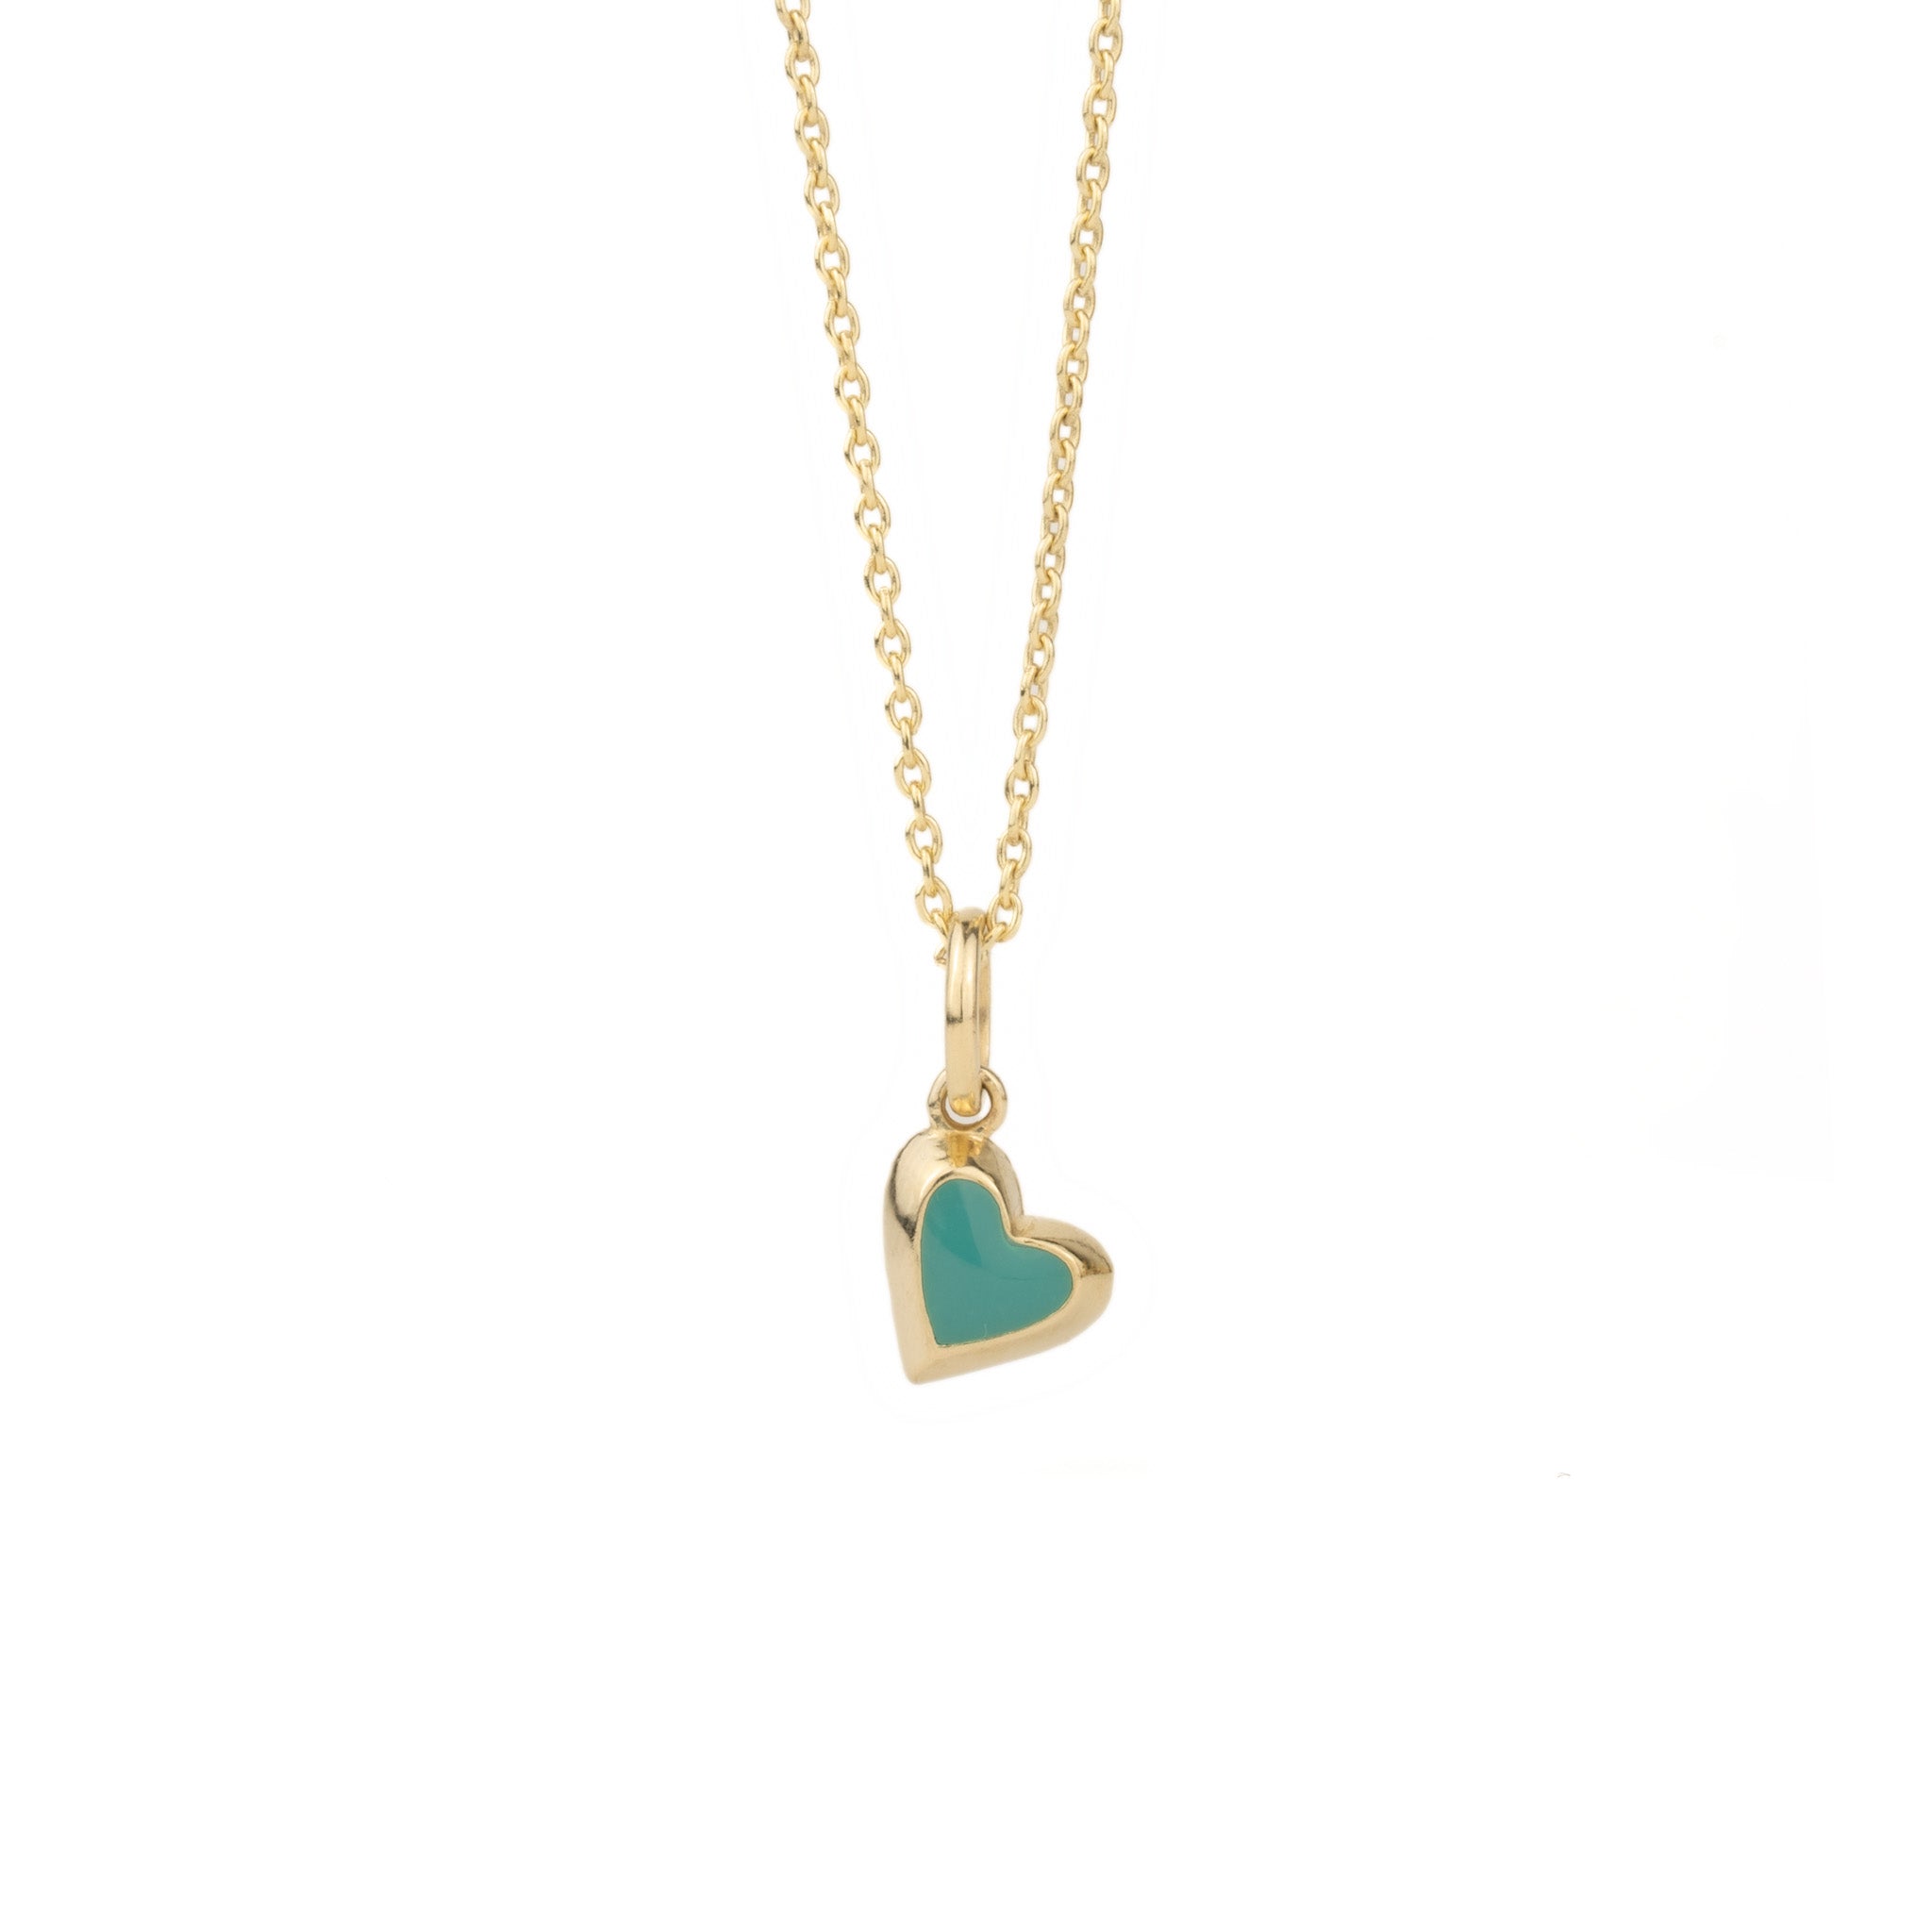 An Aiden Jae Mini Reversible Heart Charm Necklace with a green heart on it.